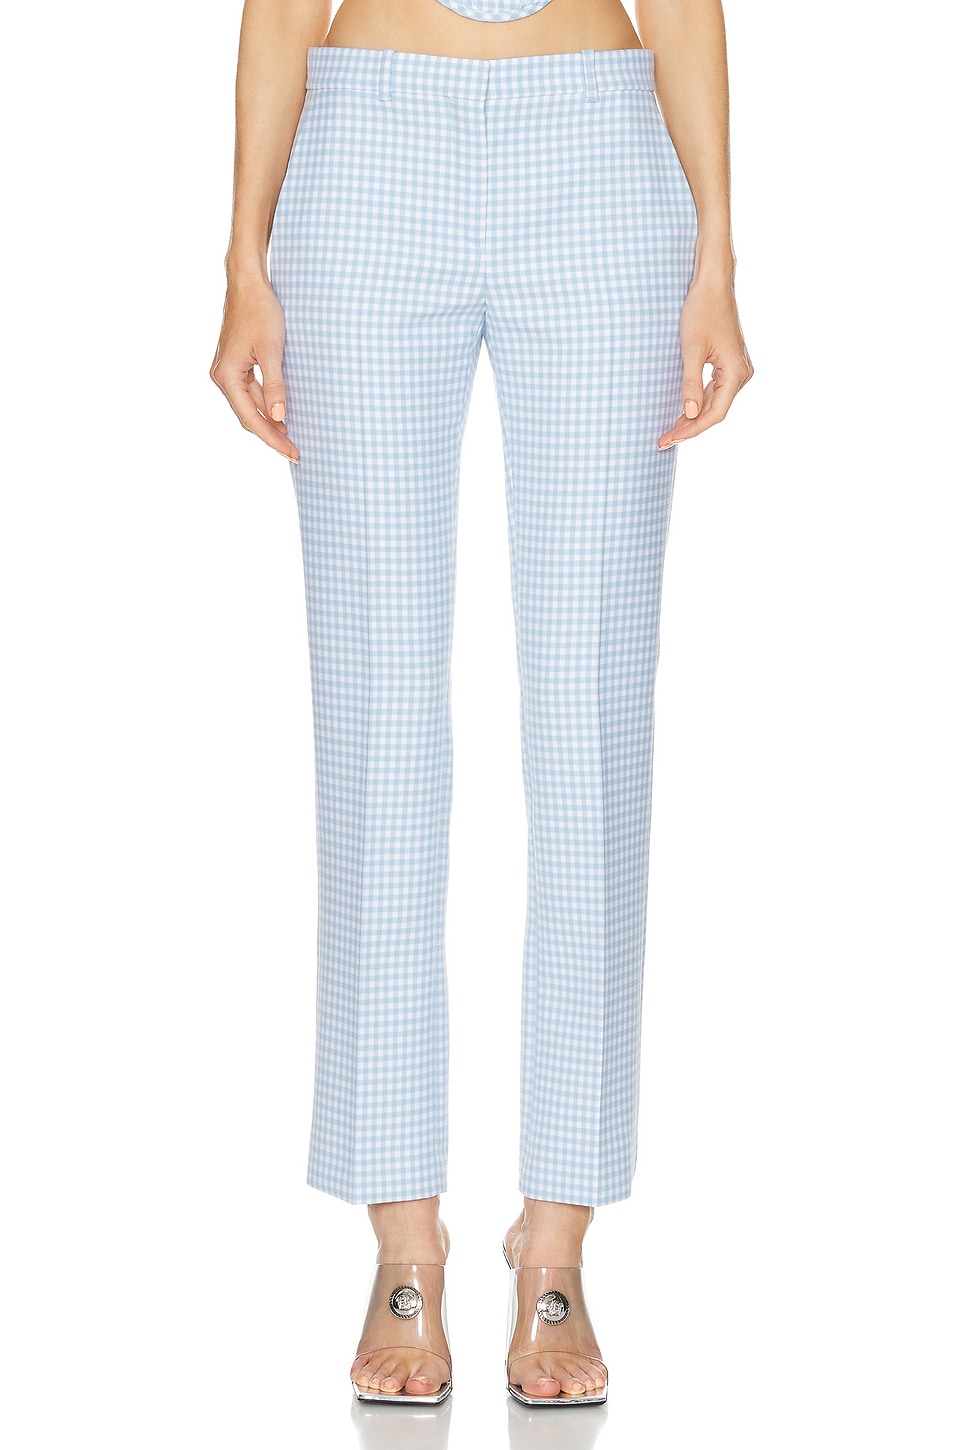 Image 1 of VERSACE Tailored Pant in Pale Blue & White